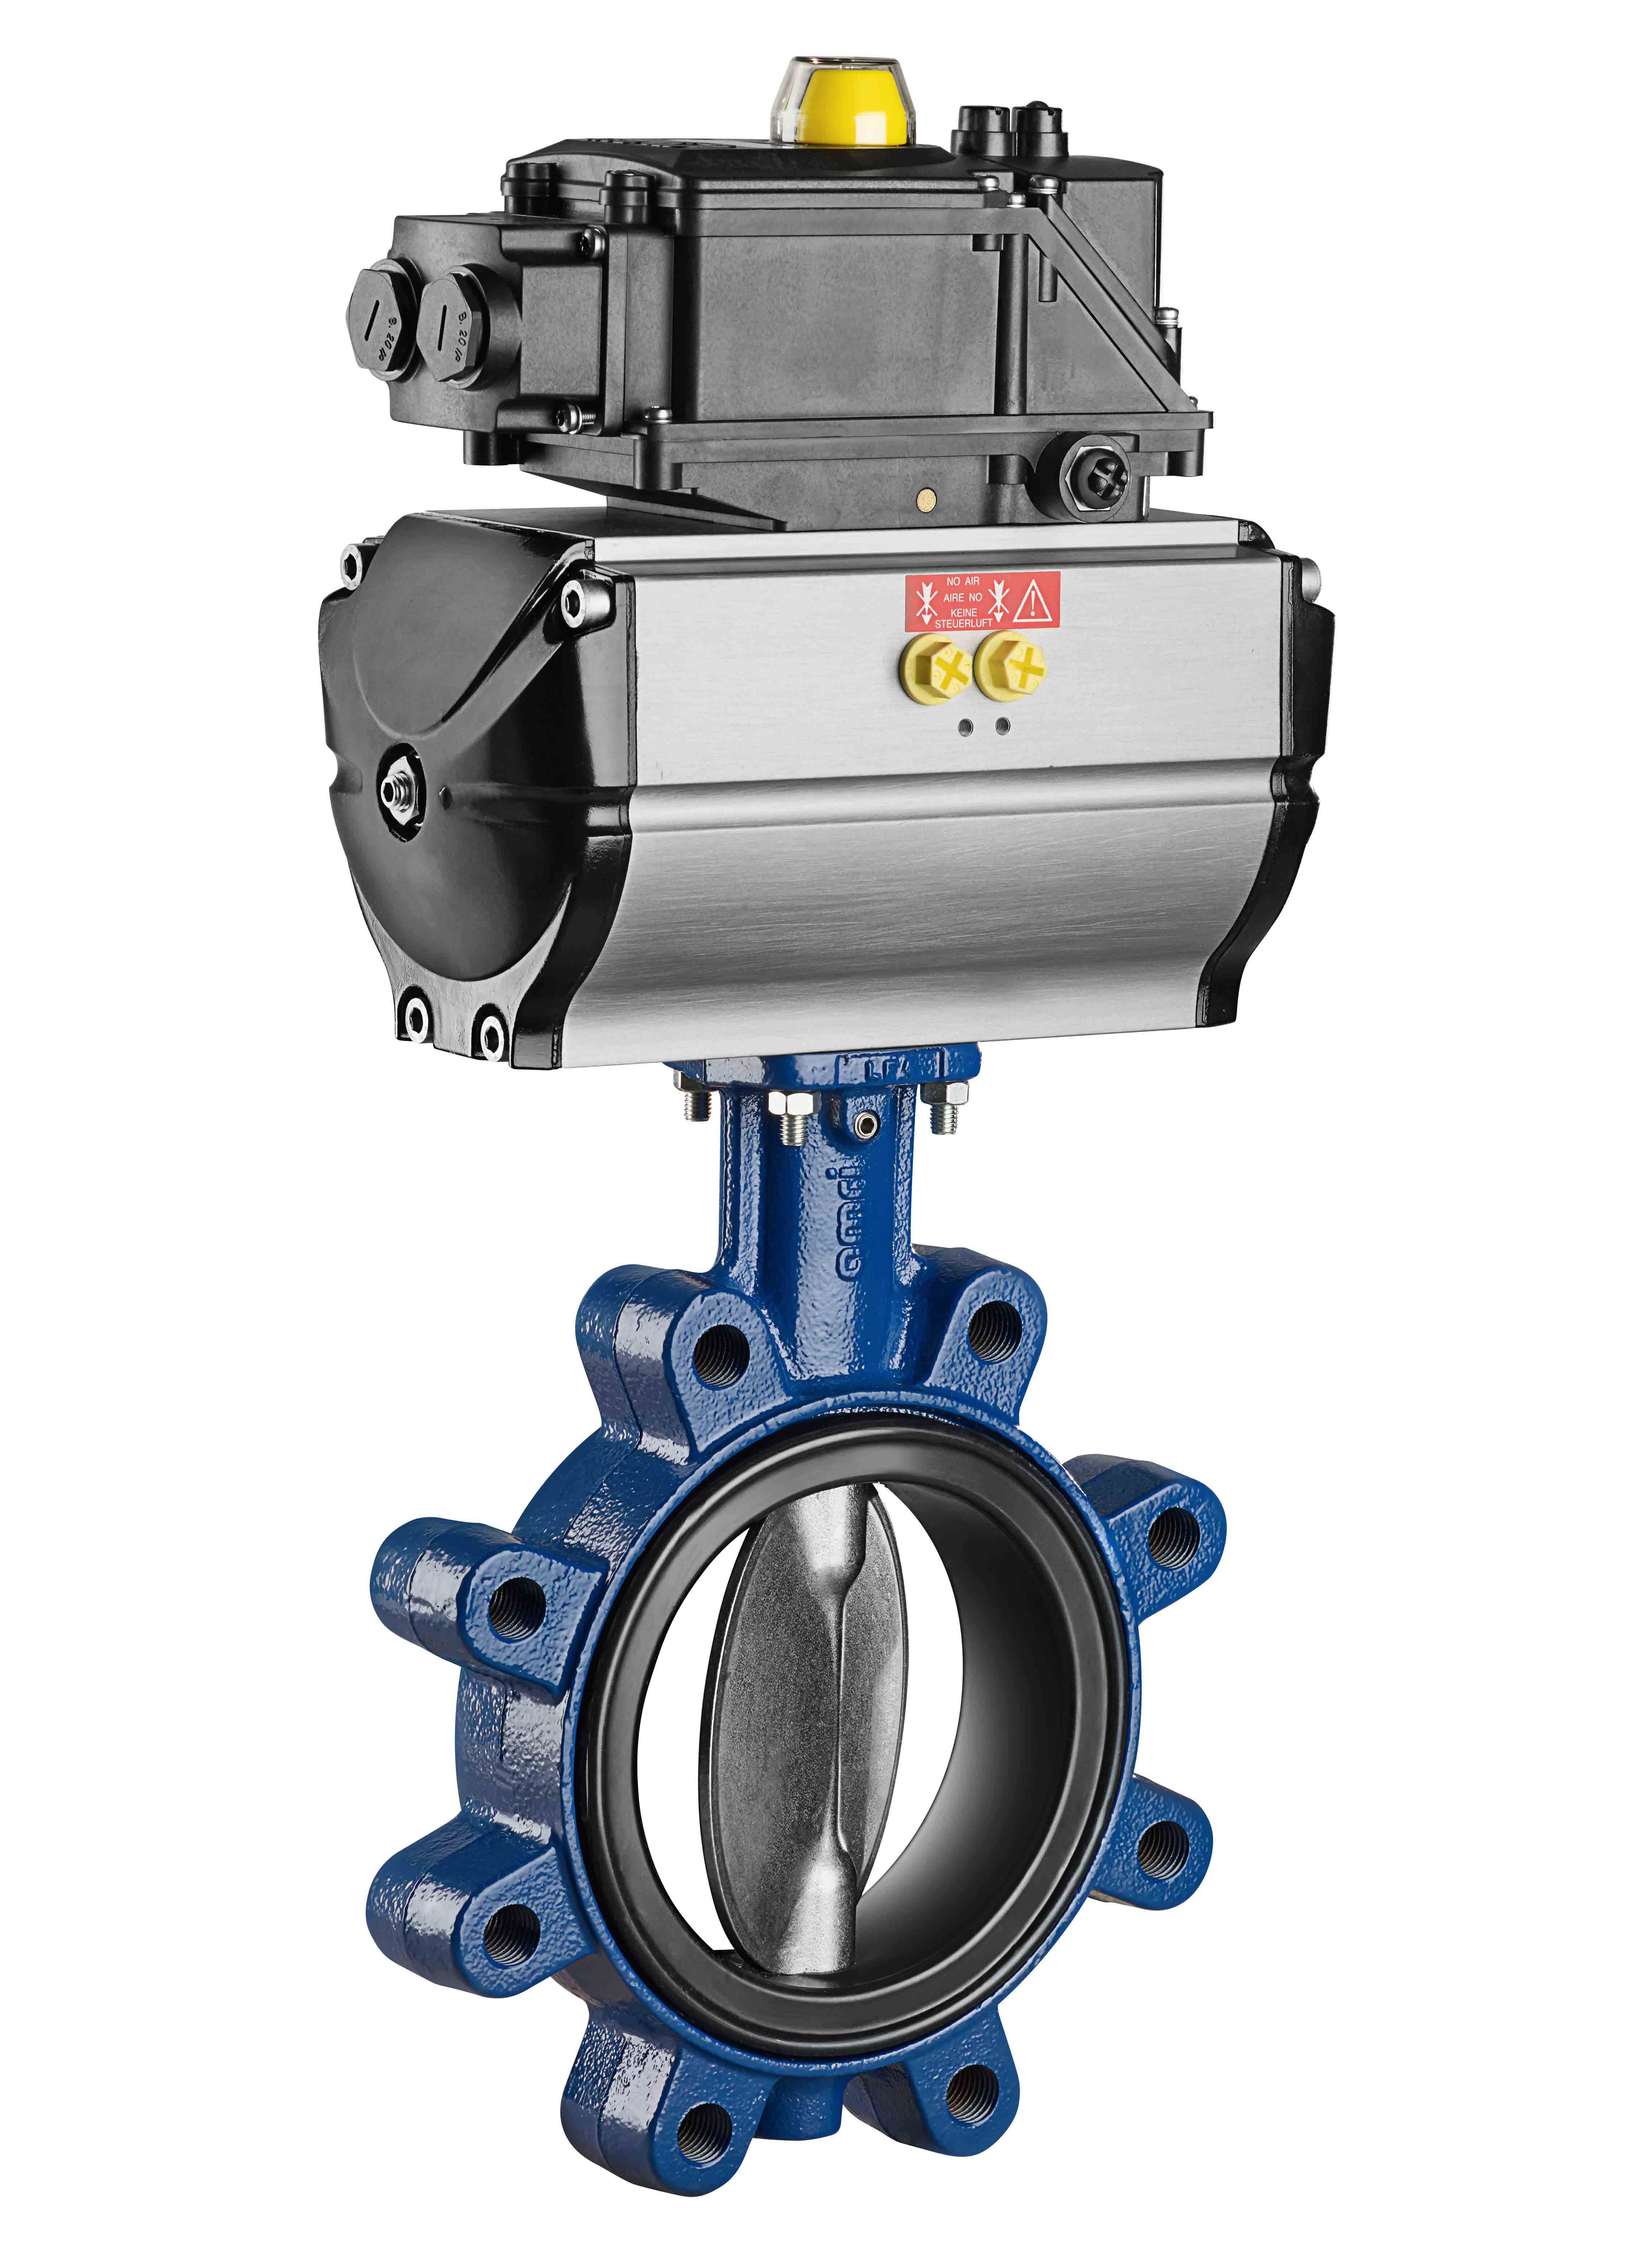 The ISORIA butterfly valves are now available with an oil-resistant liner for food applications. (Image: KSB)